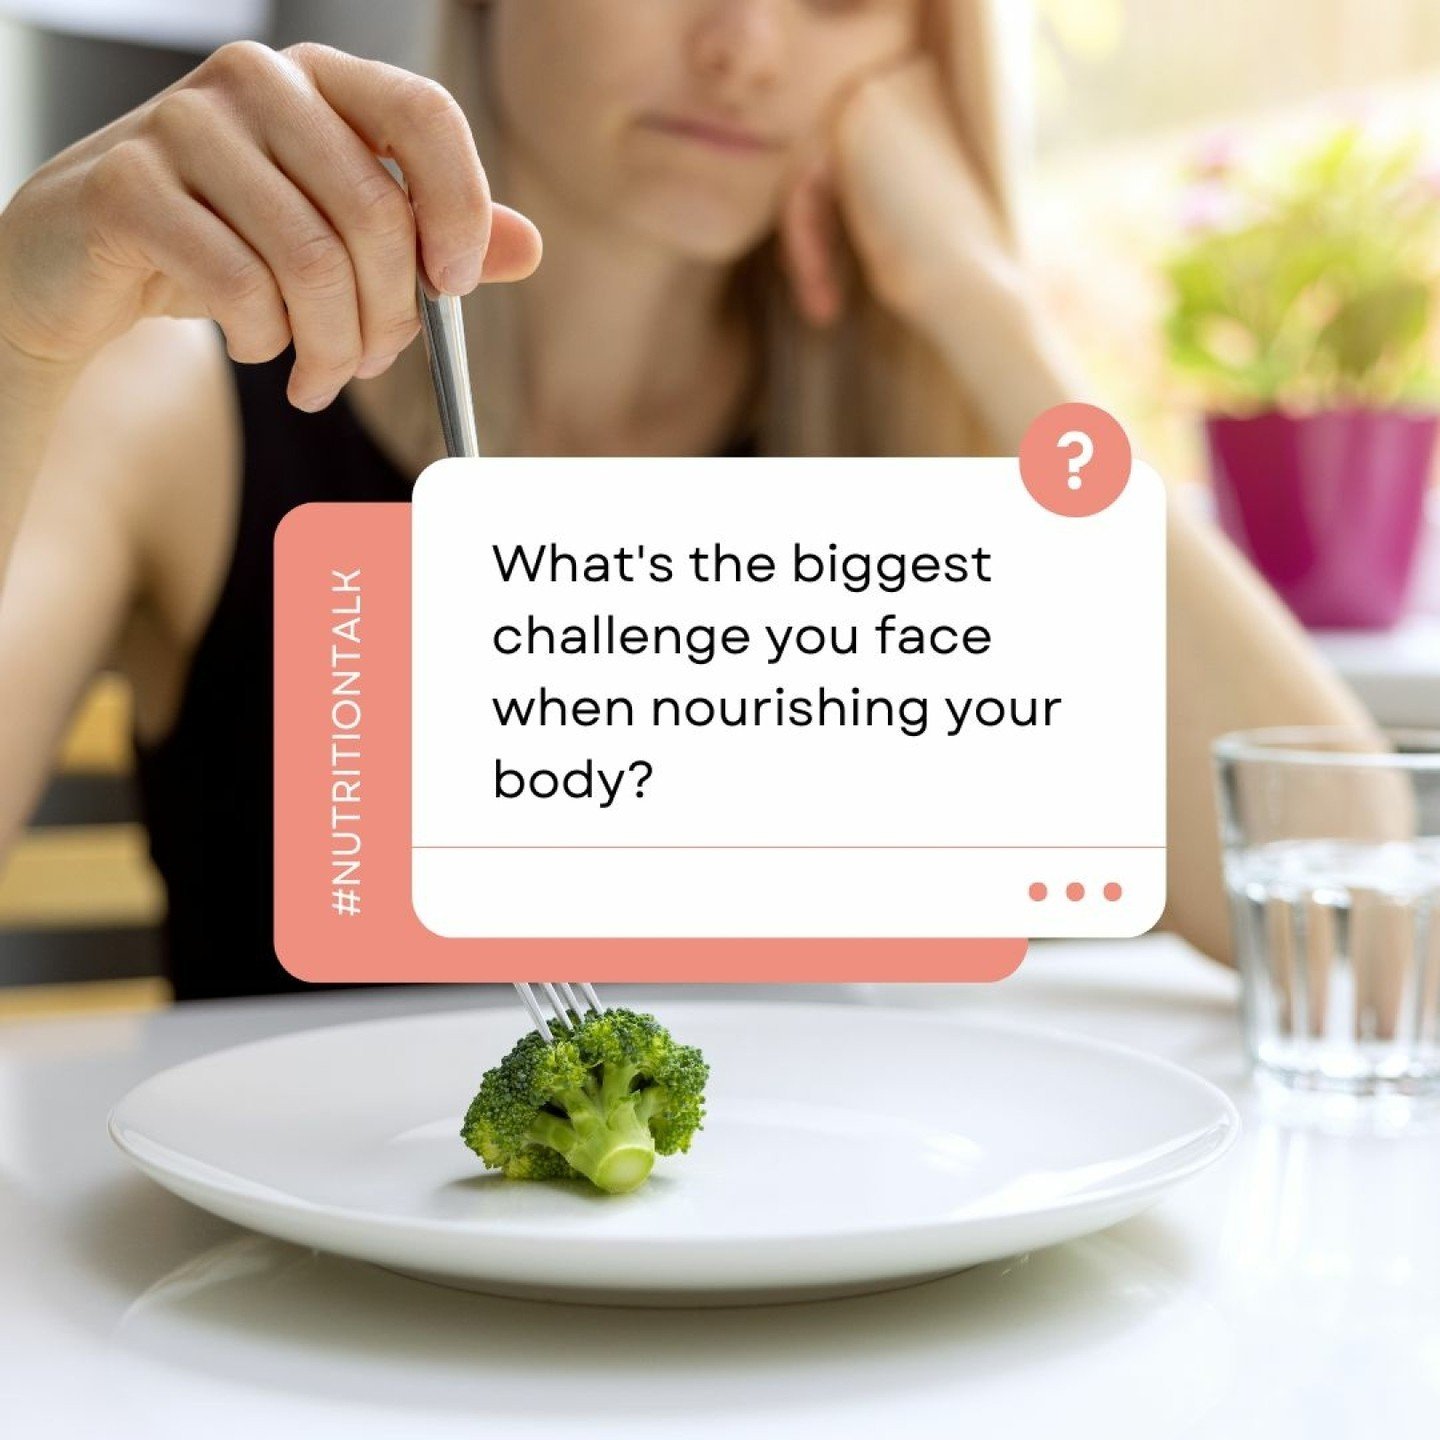 🍏 Let's talk real talk about nutrition! 

🍏What's the biggest challenge you face when nourishing your body? 

🍏Share your thoughts below! 

#NutritionTalk #RealWorldNutrition #HealthyChoices #NutritionGoals #SelfCareSunday